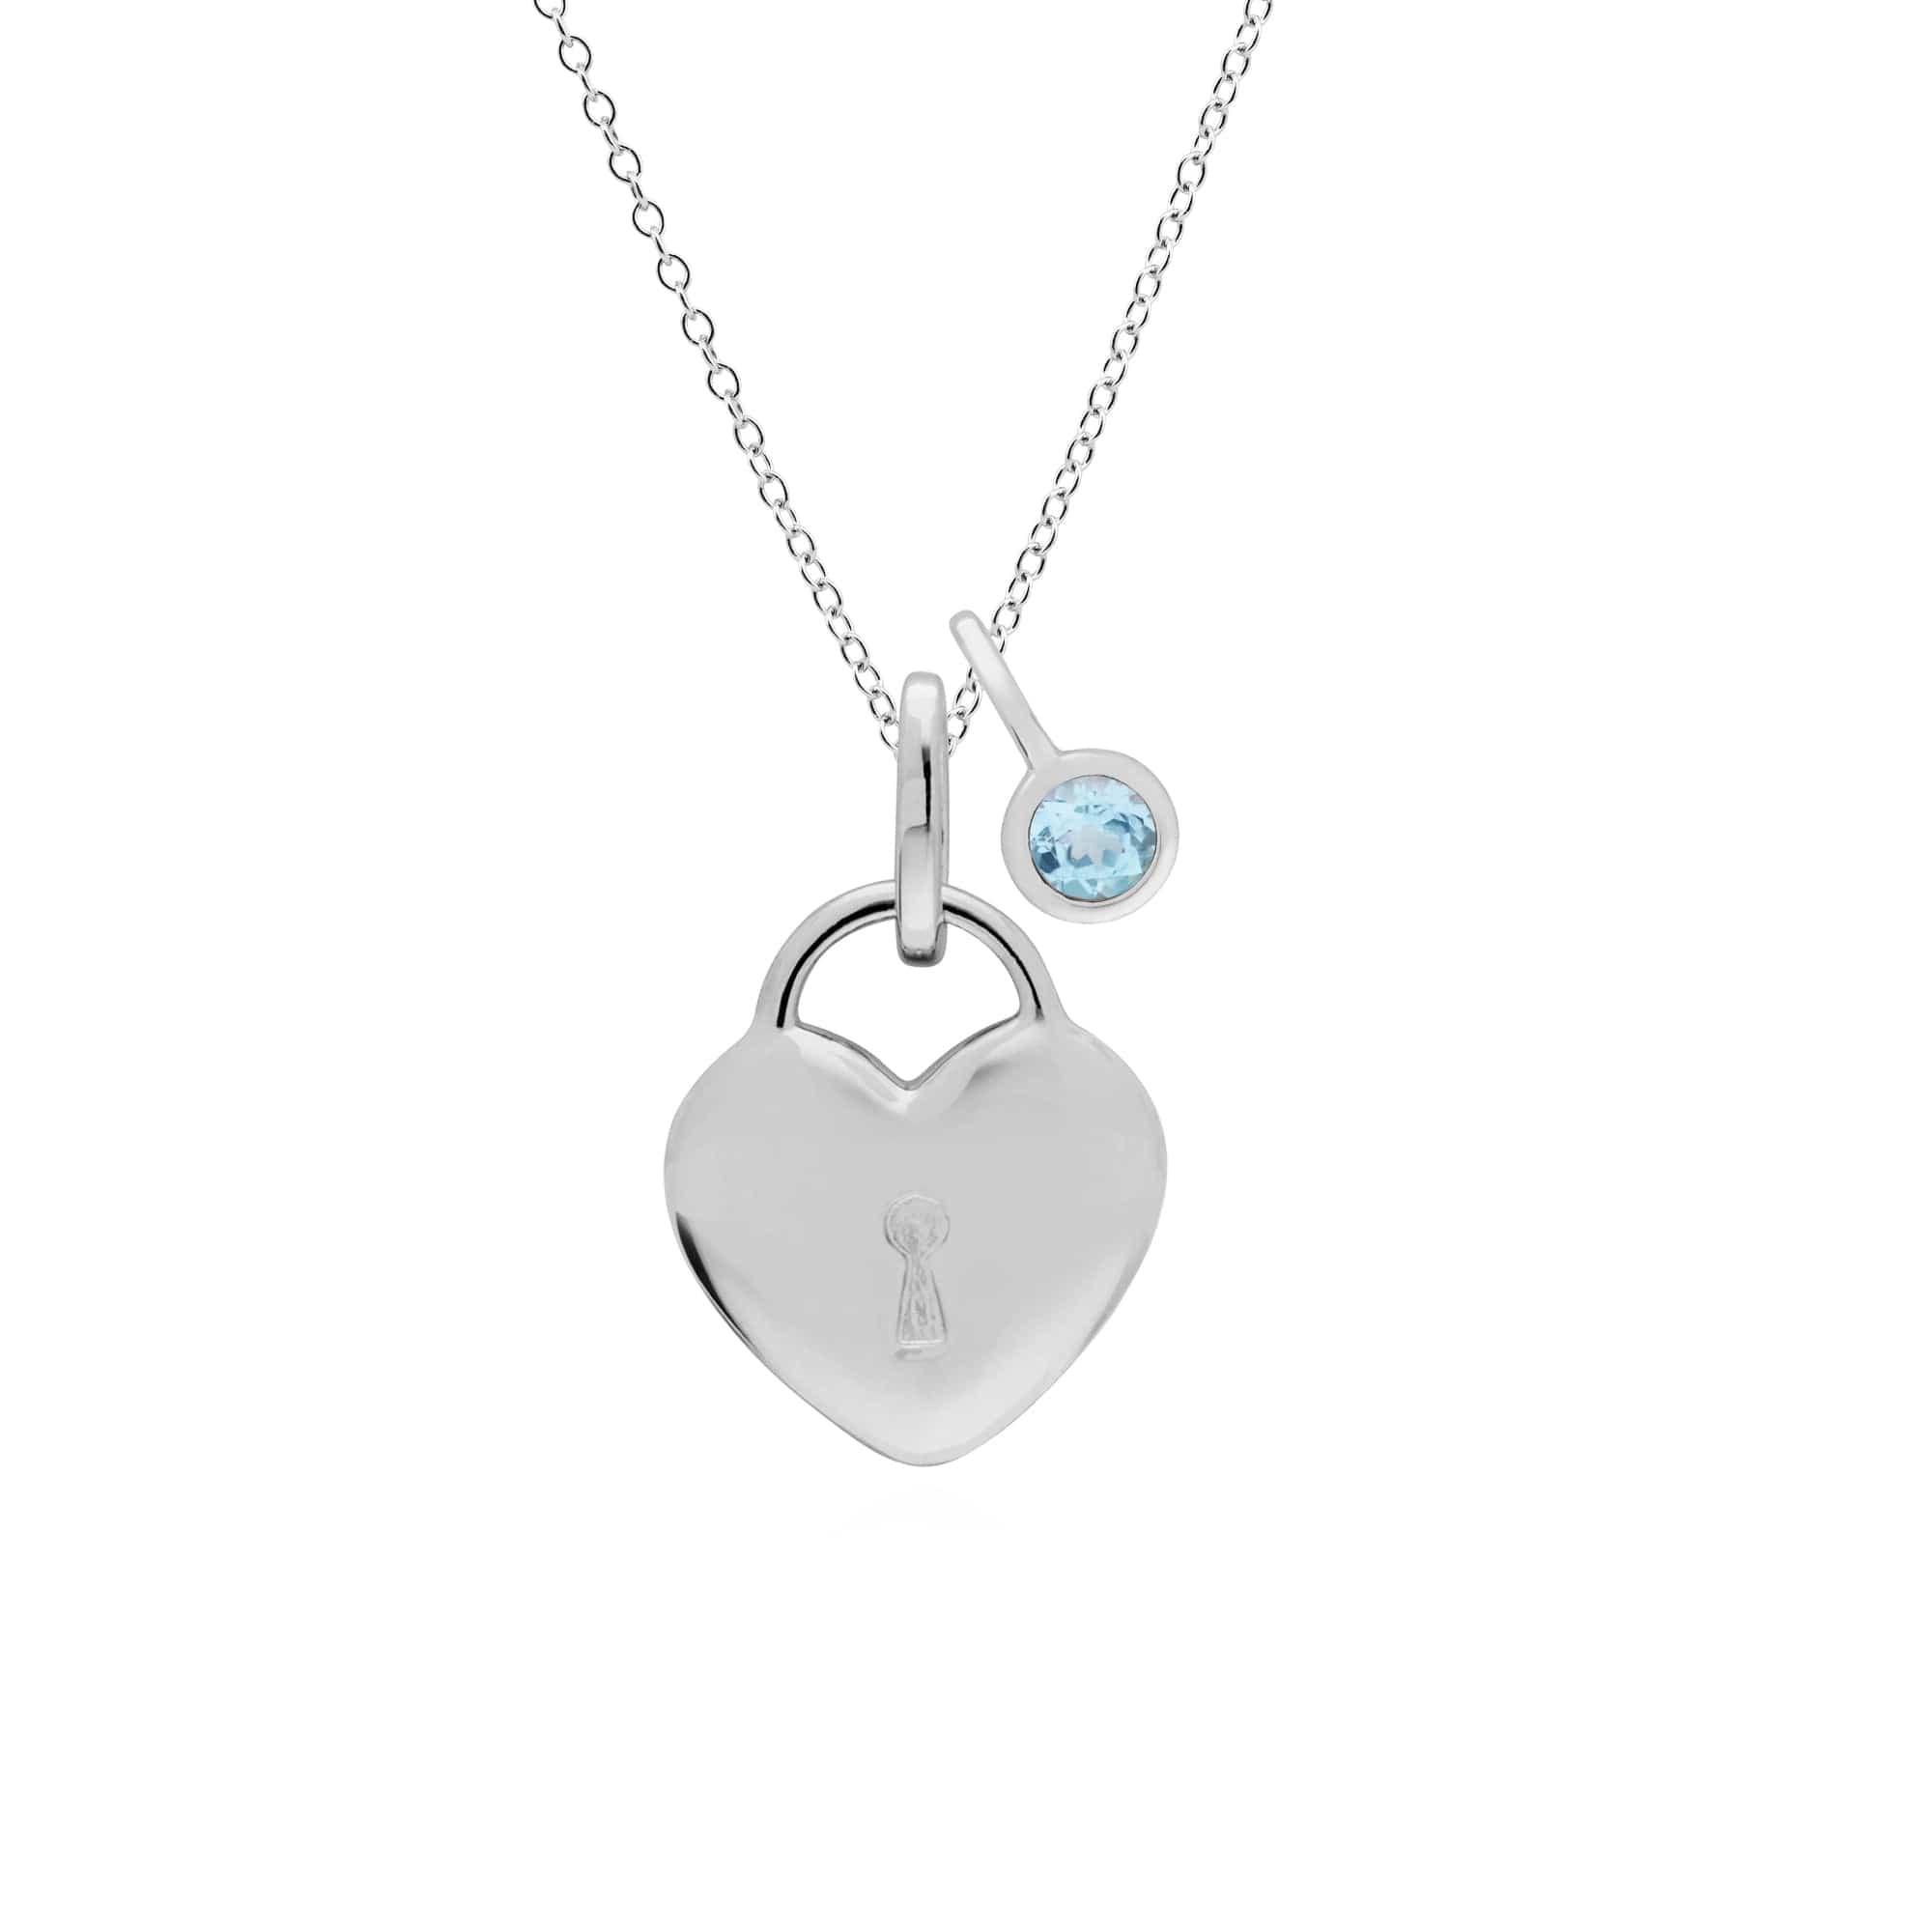 270P027601925-270P027001925 Classic Heart Lock Pendant & Blue Topaz Charm in 925 Sterling Silver 1